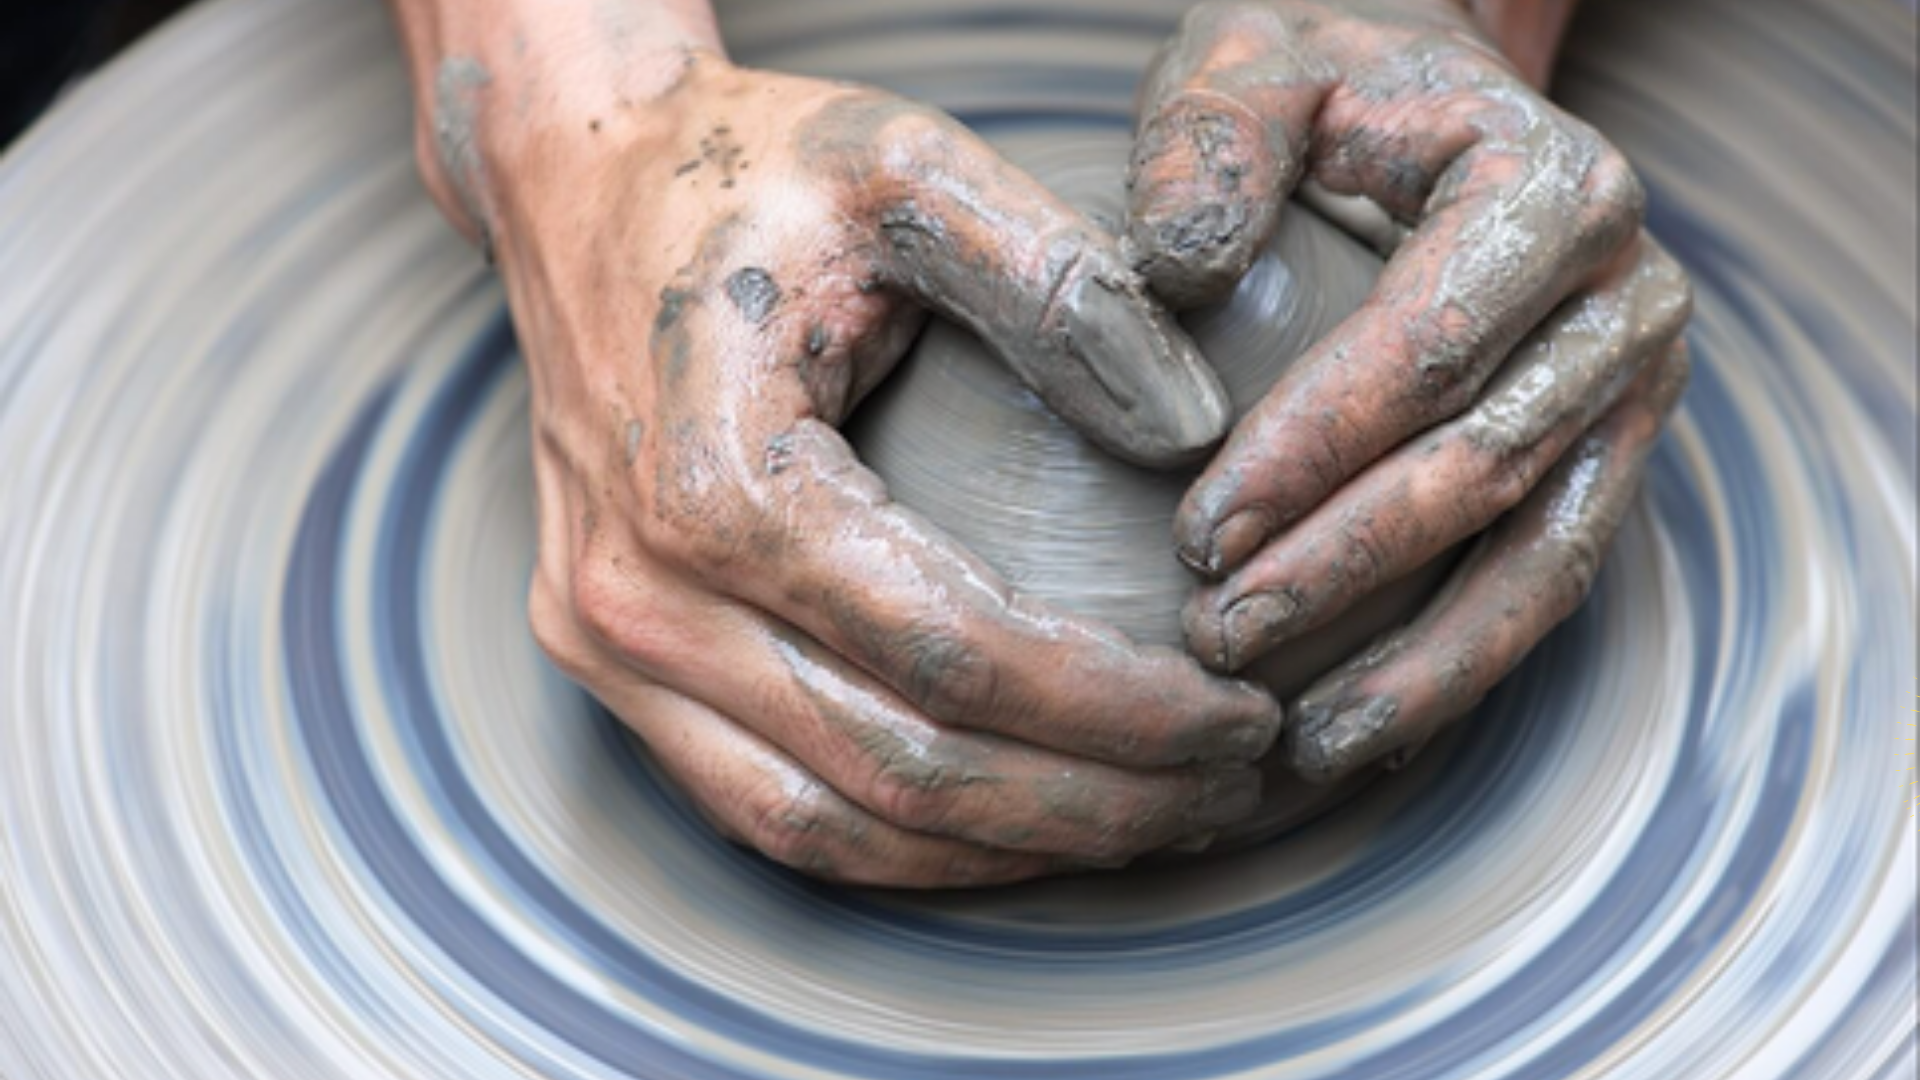 Hands on Pottery